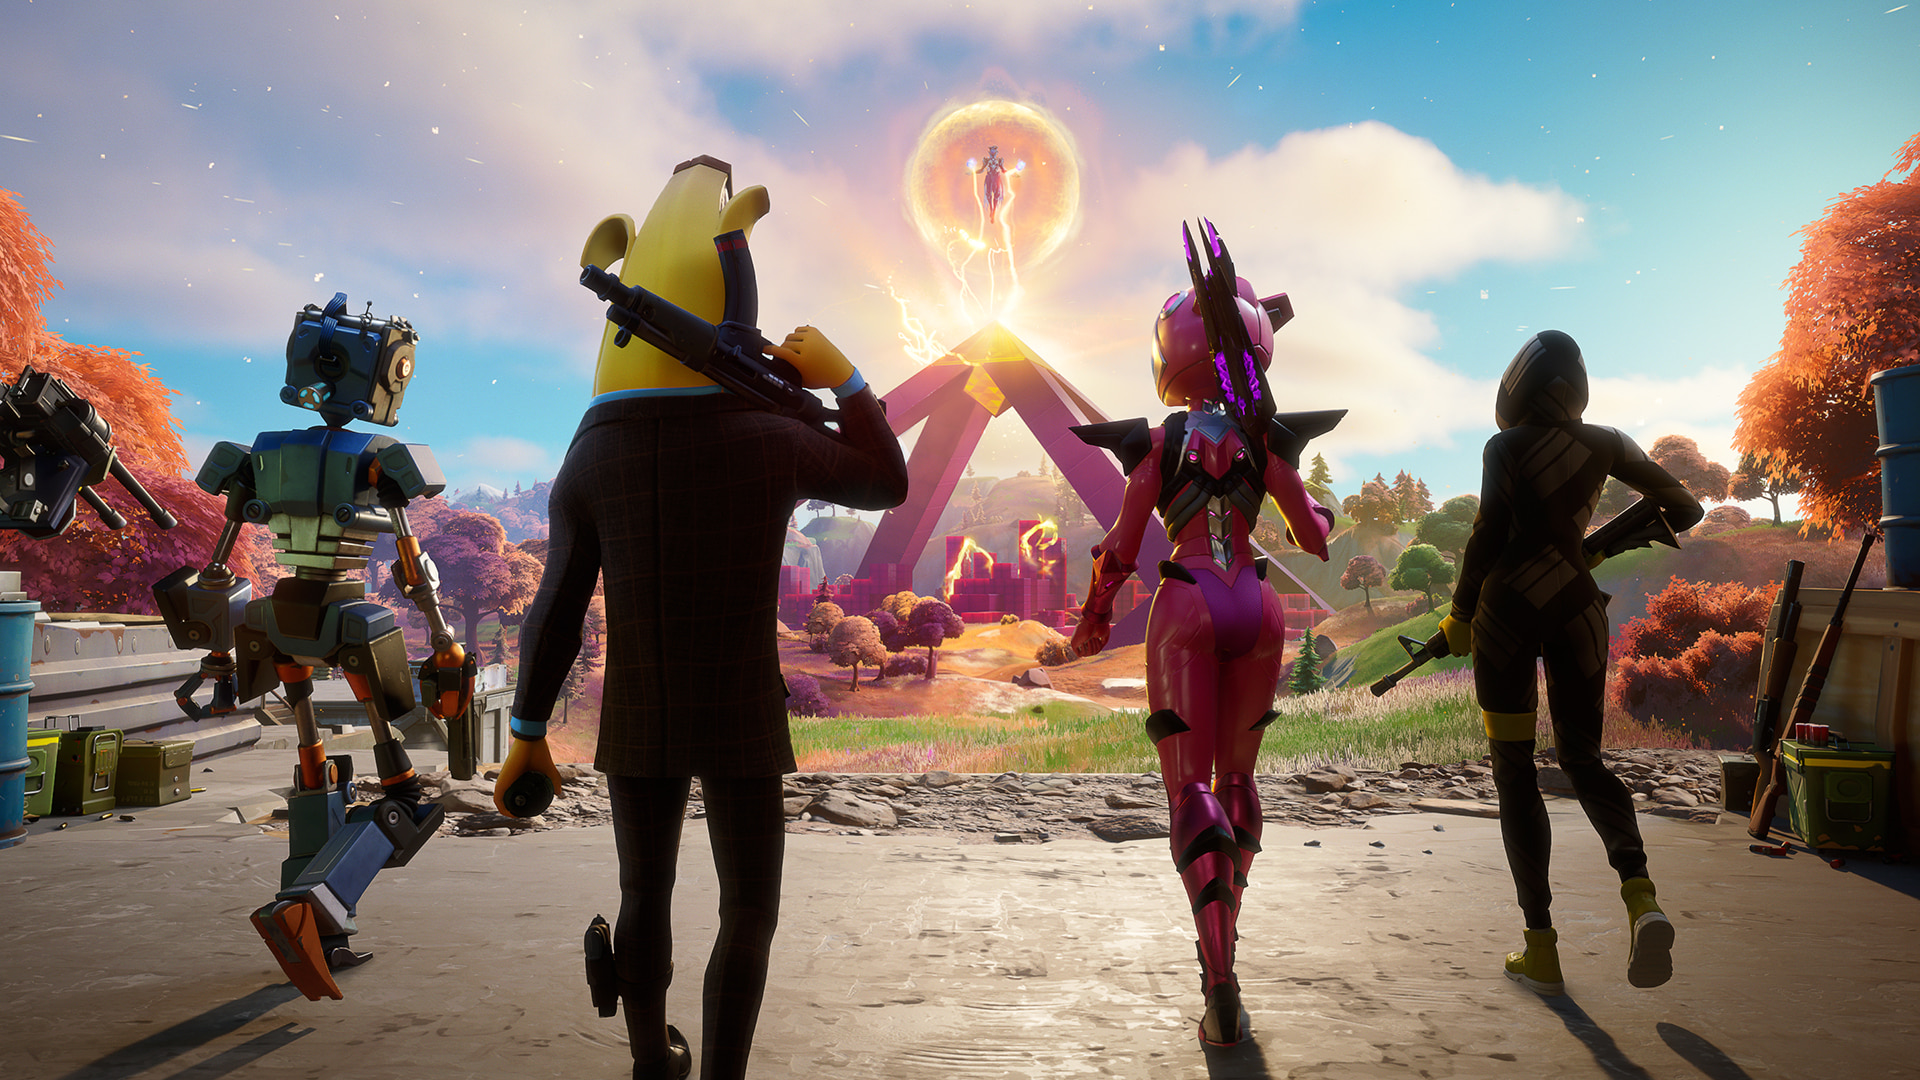 'Fortnite' Chapter 2 will end with a big ingame event on December 4th